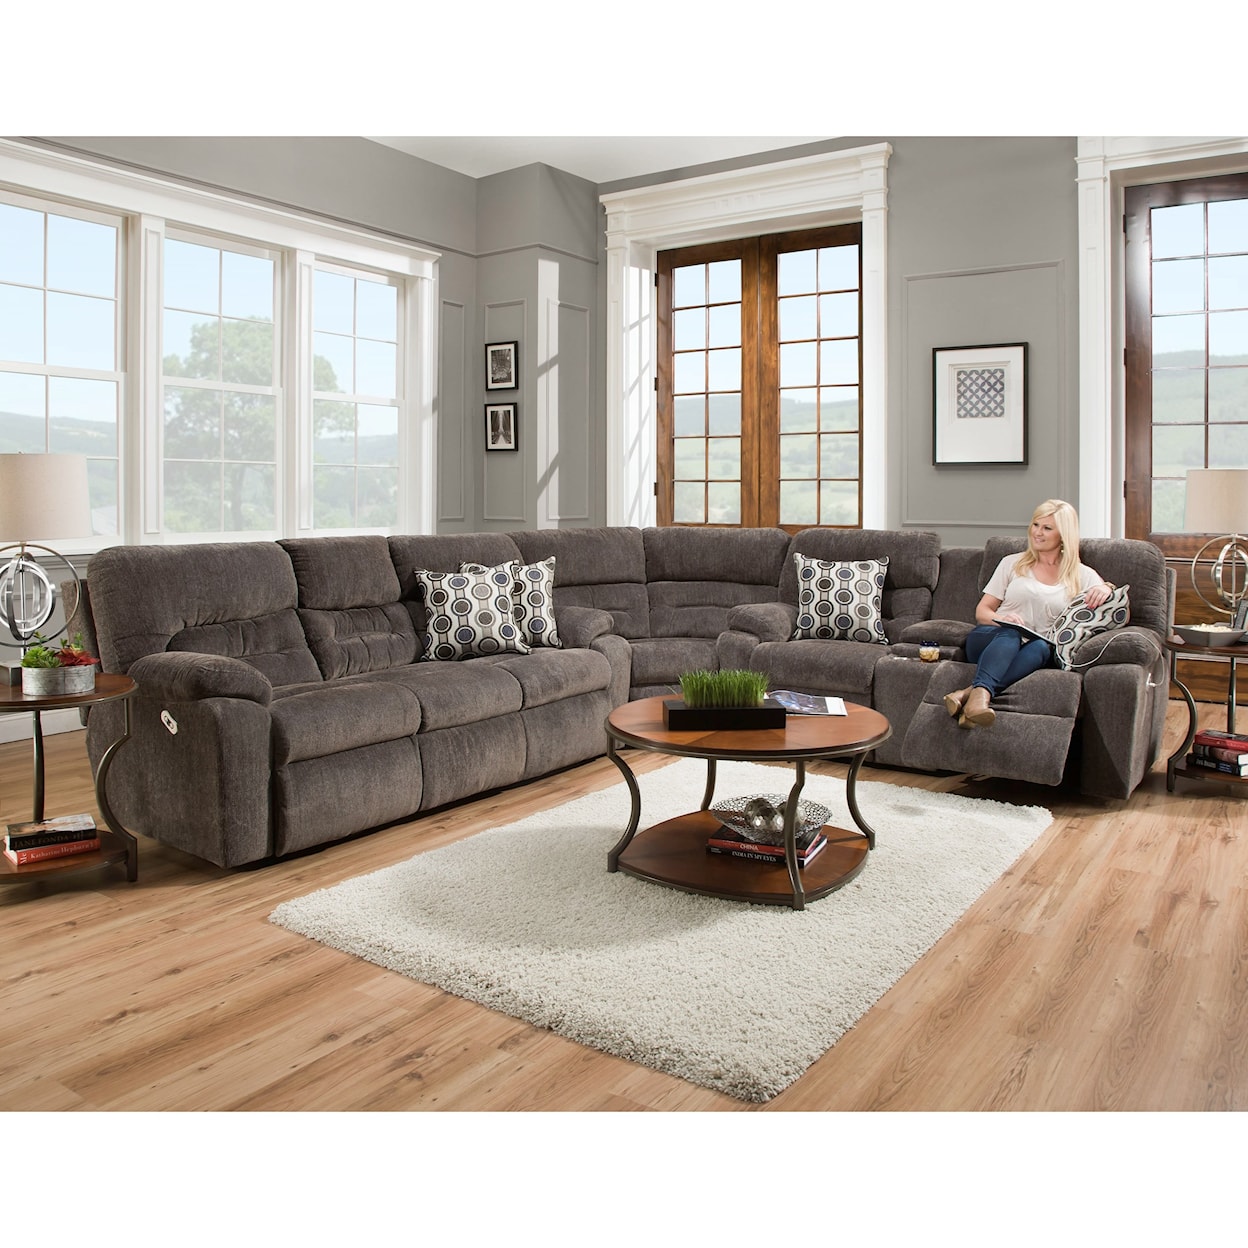 Franklin Tribute 6 Seat Power Reclining Sectional